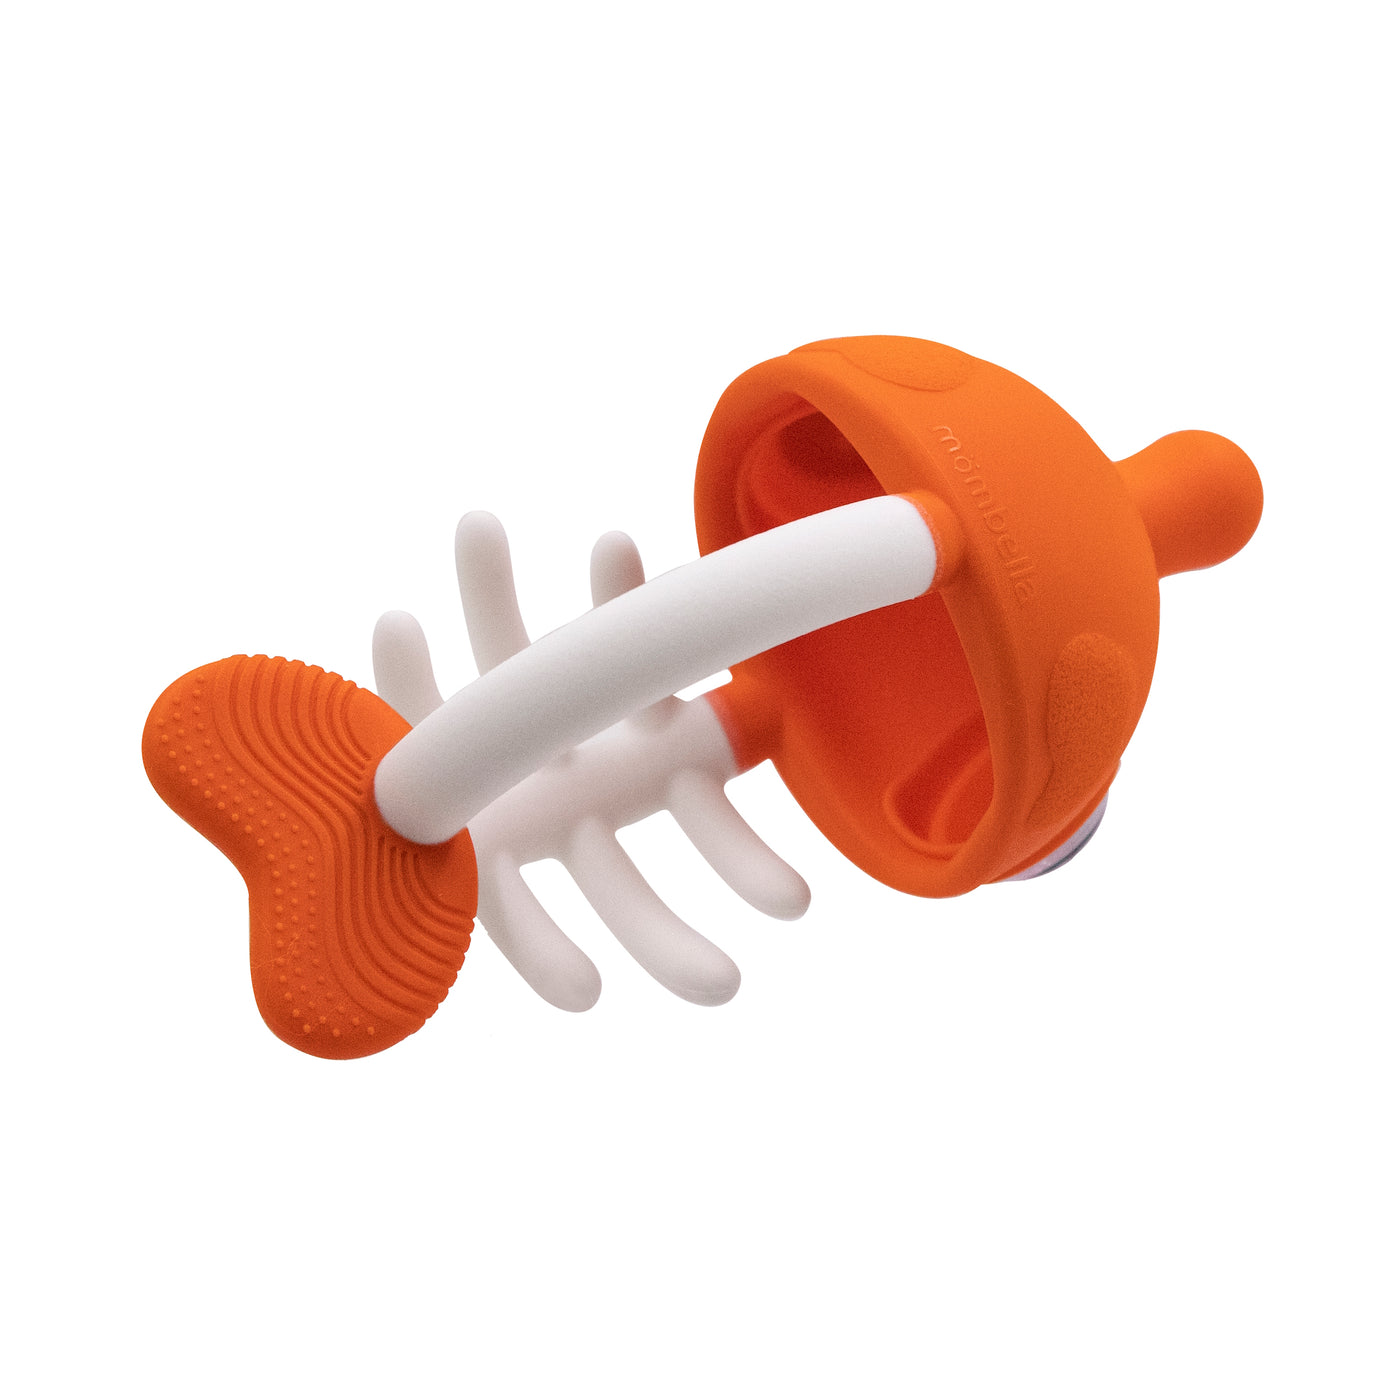 Clownfish Soothing Teether Toy